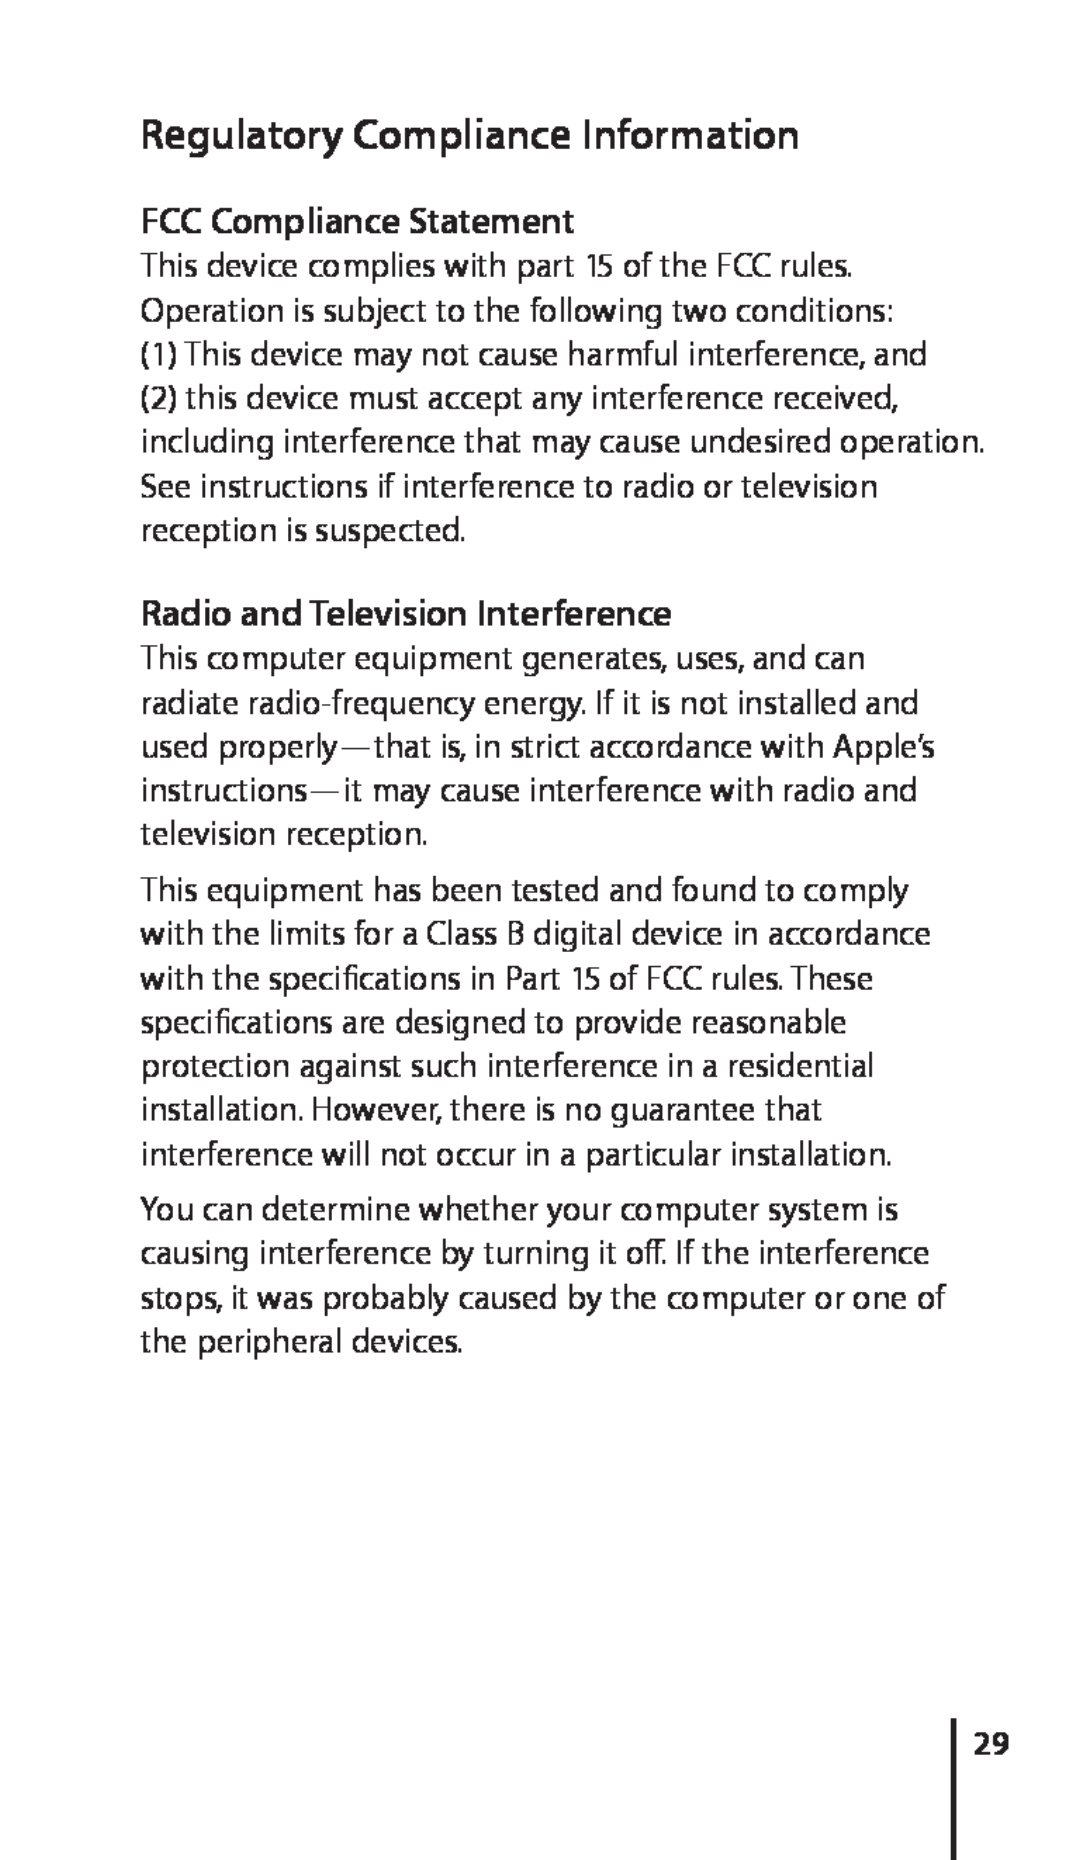 Apple 034-4945-A manual FCC Compliance Statement, Radio and Television Interference, Regulatory Compliance Information 